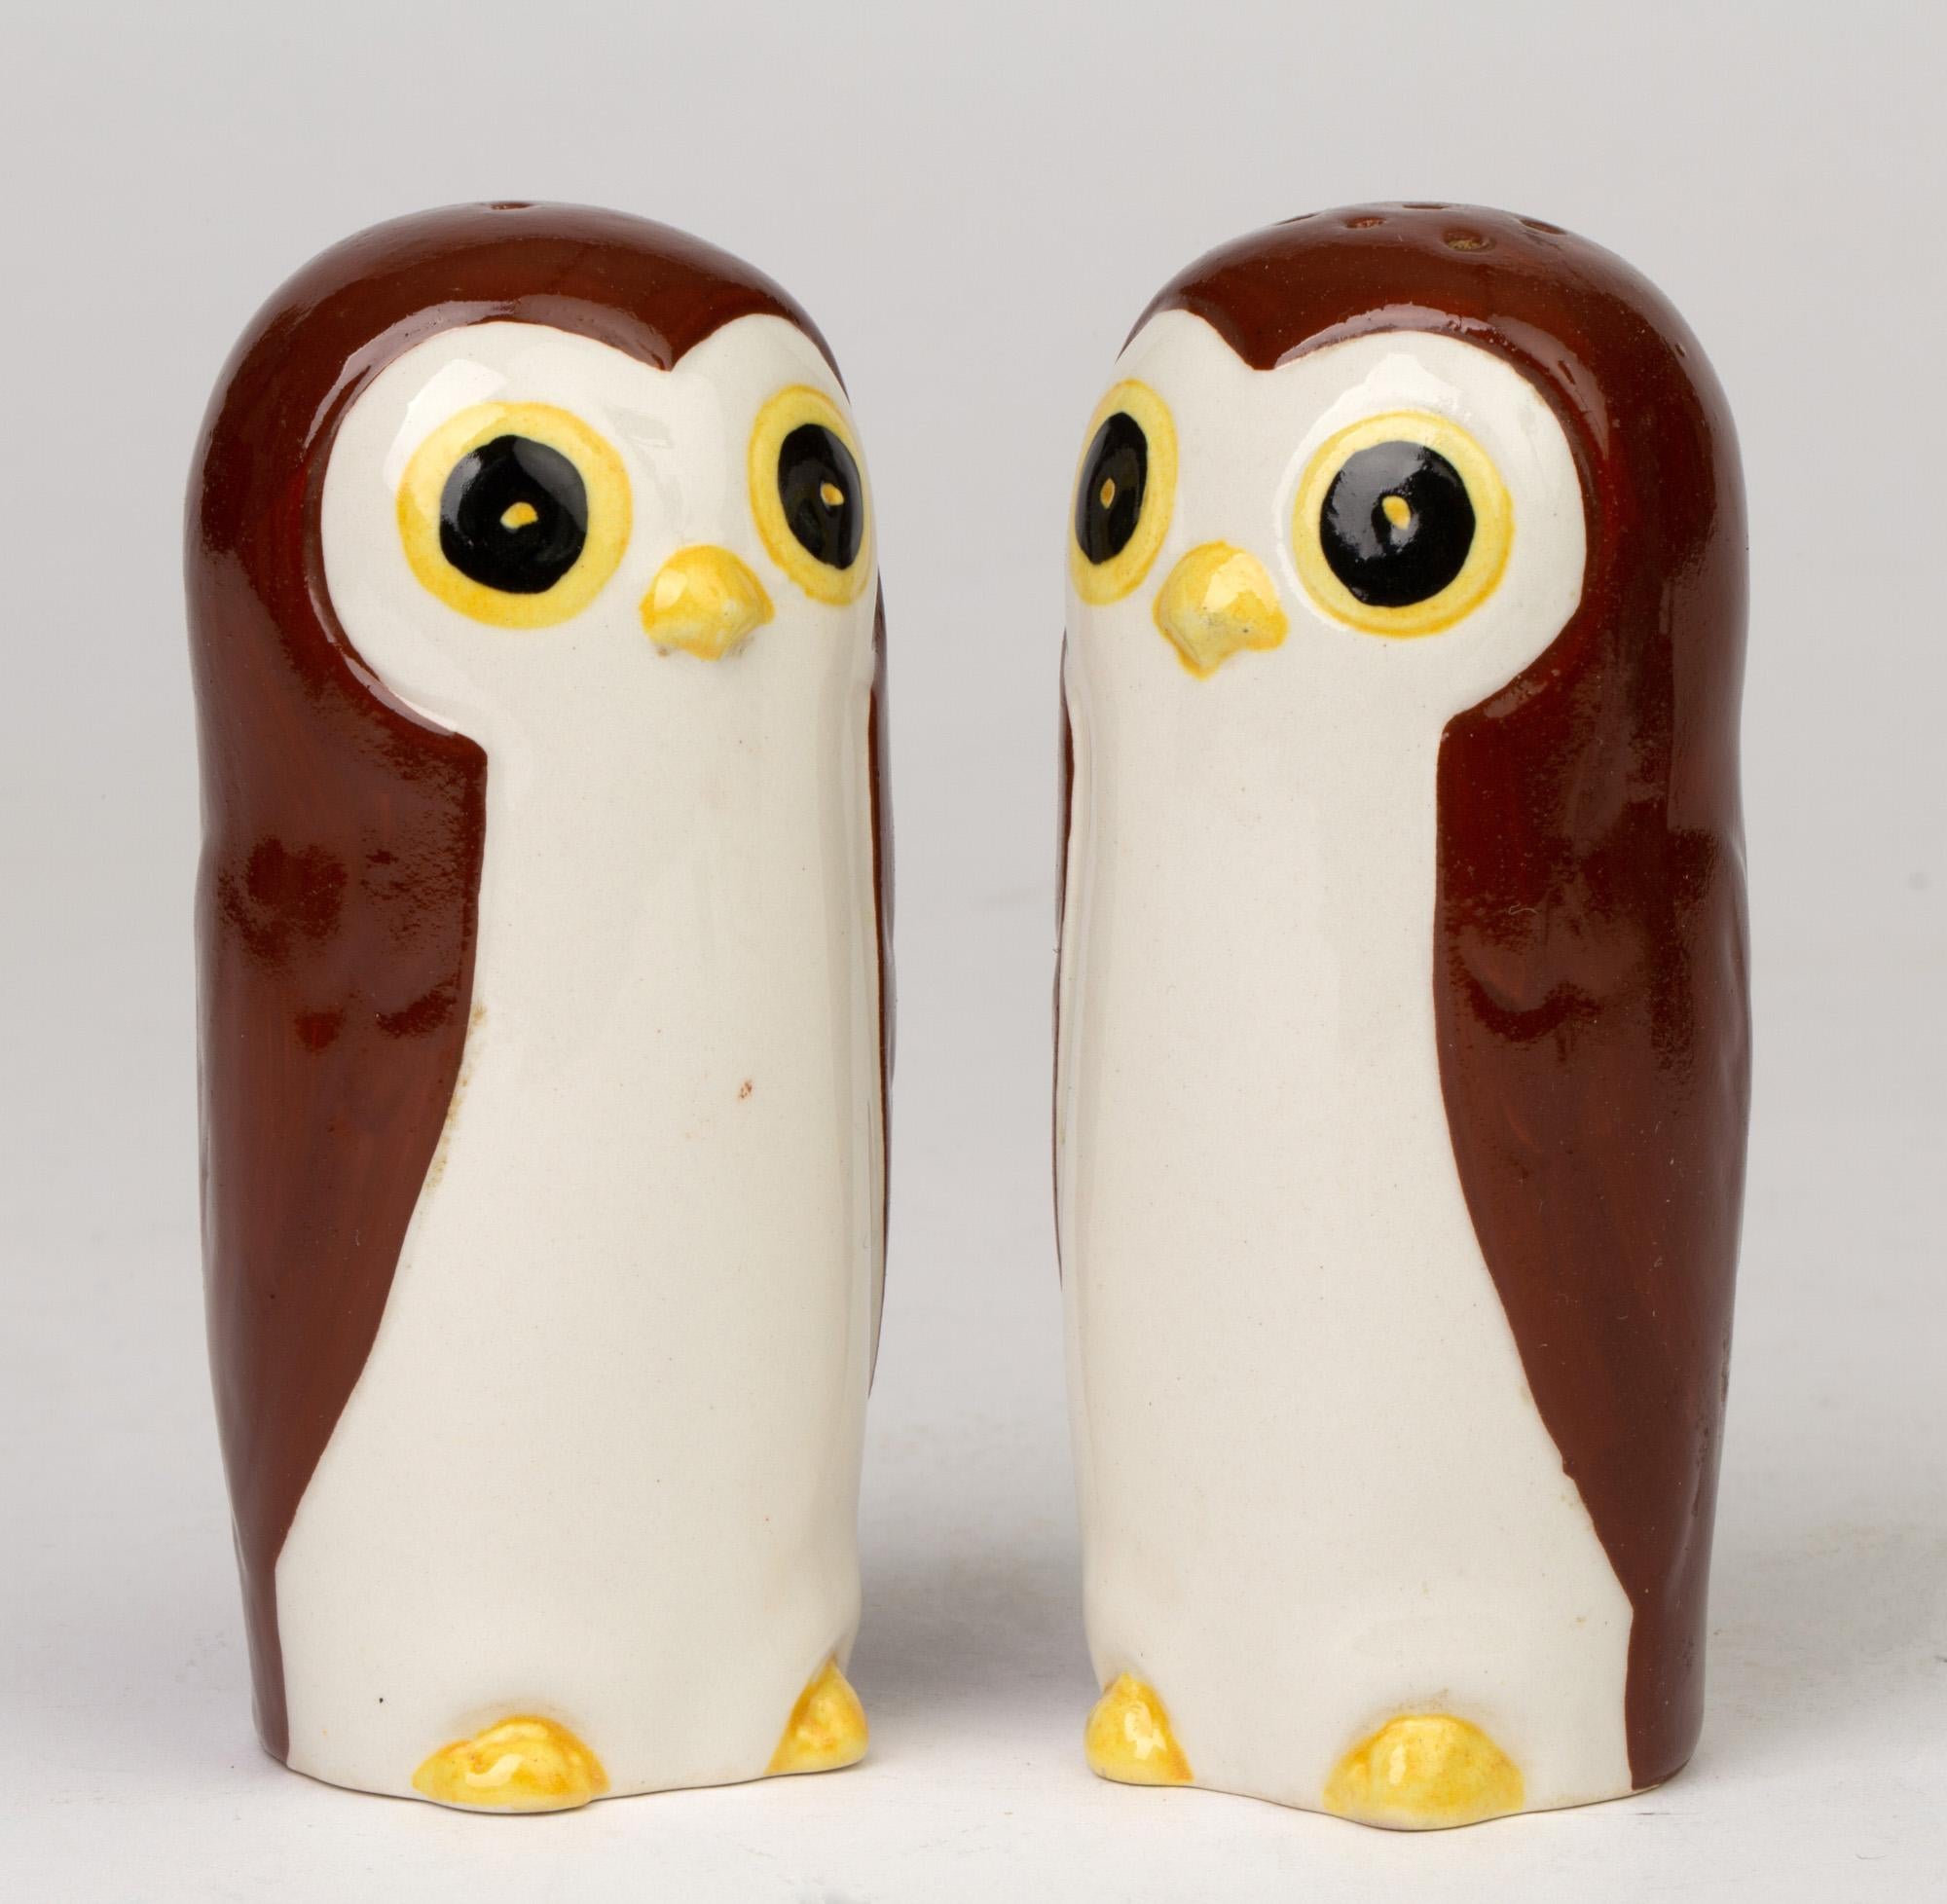 A delightful novelty Carltonware pottery cruet set comprising of a salt and pepper pot modeled as owls and dating from circa 1970. The cruets are modeled as young standing owls with simple molded shapes and hand decorated in brown, yellow and black